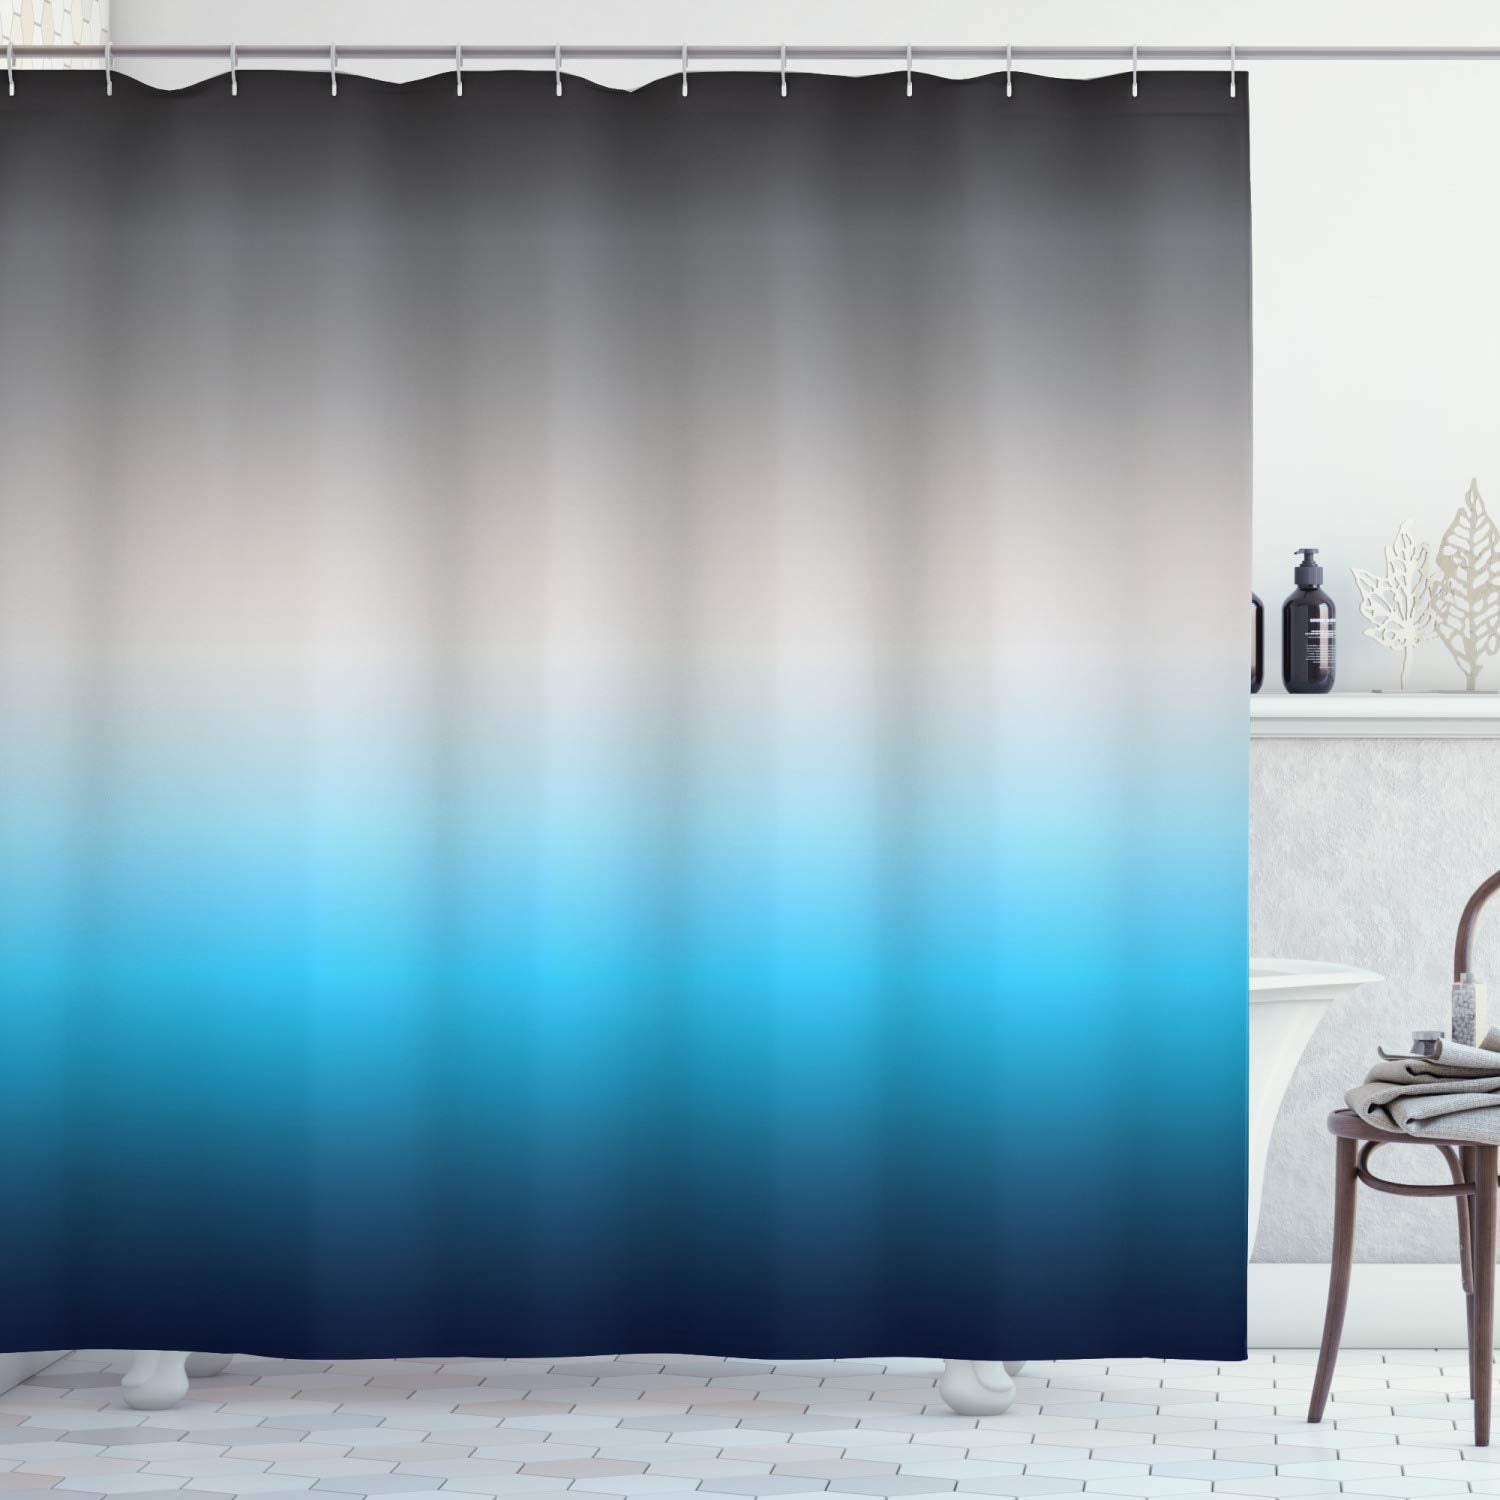 Ambesonne Home Decorations Art Bathroom Decor Collection, 70 Inches Long, Polyester Fabric Shower Curtain Set with Hooks, Ombre Colorful Design Gray Blue Navy